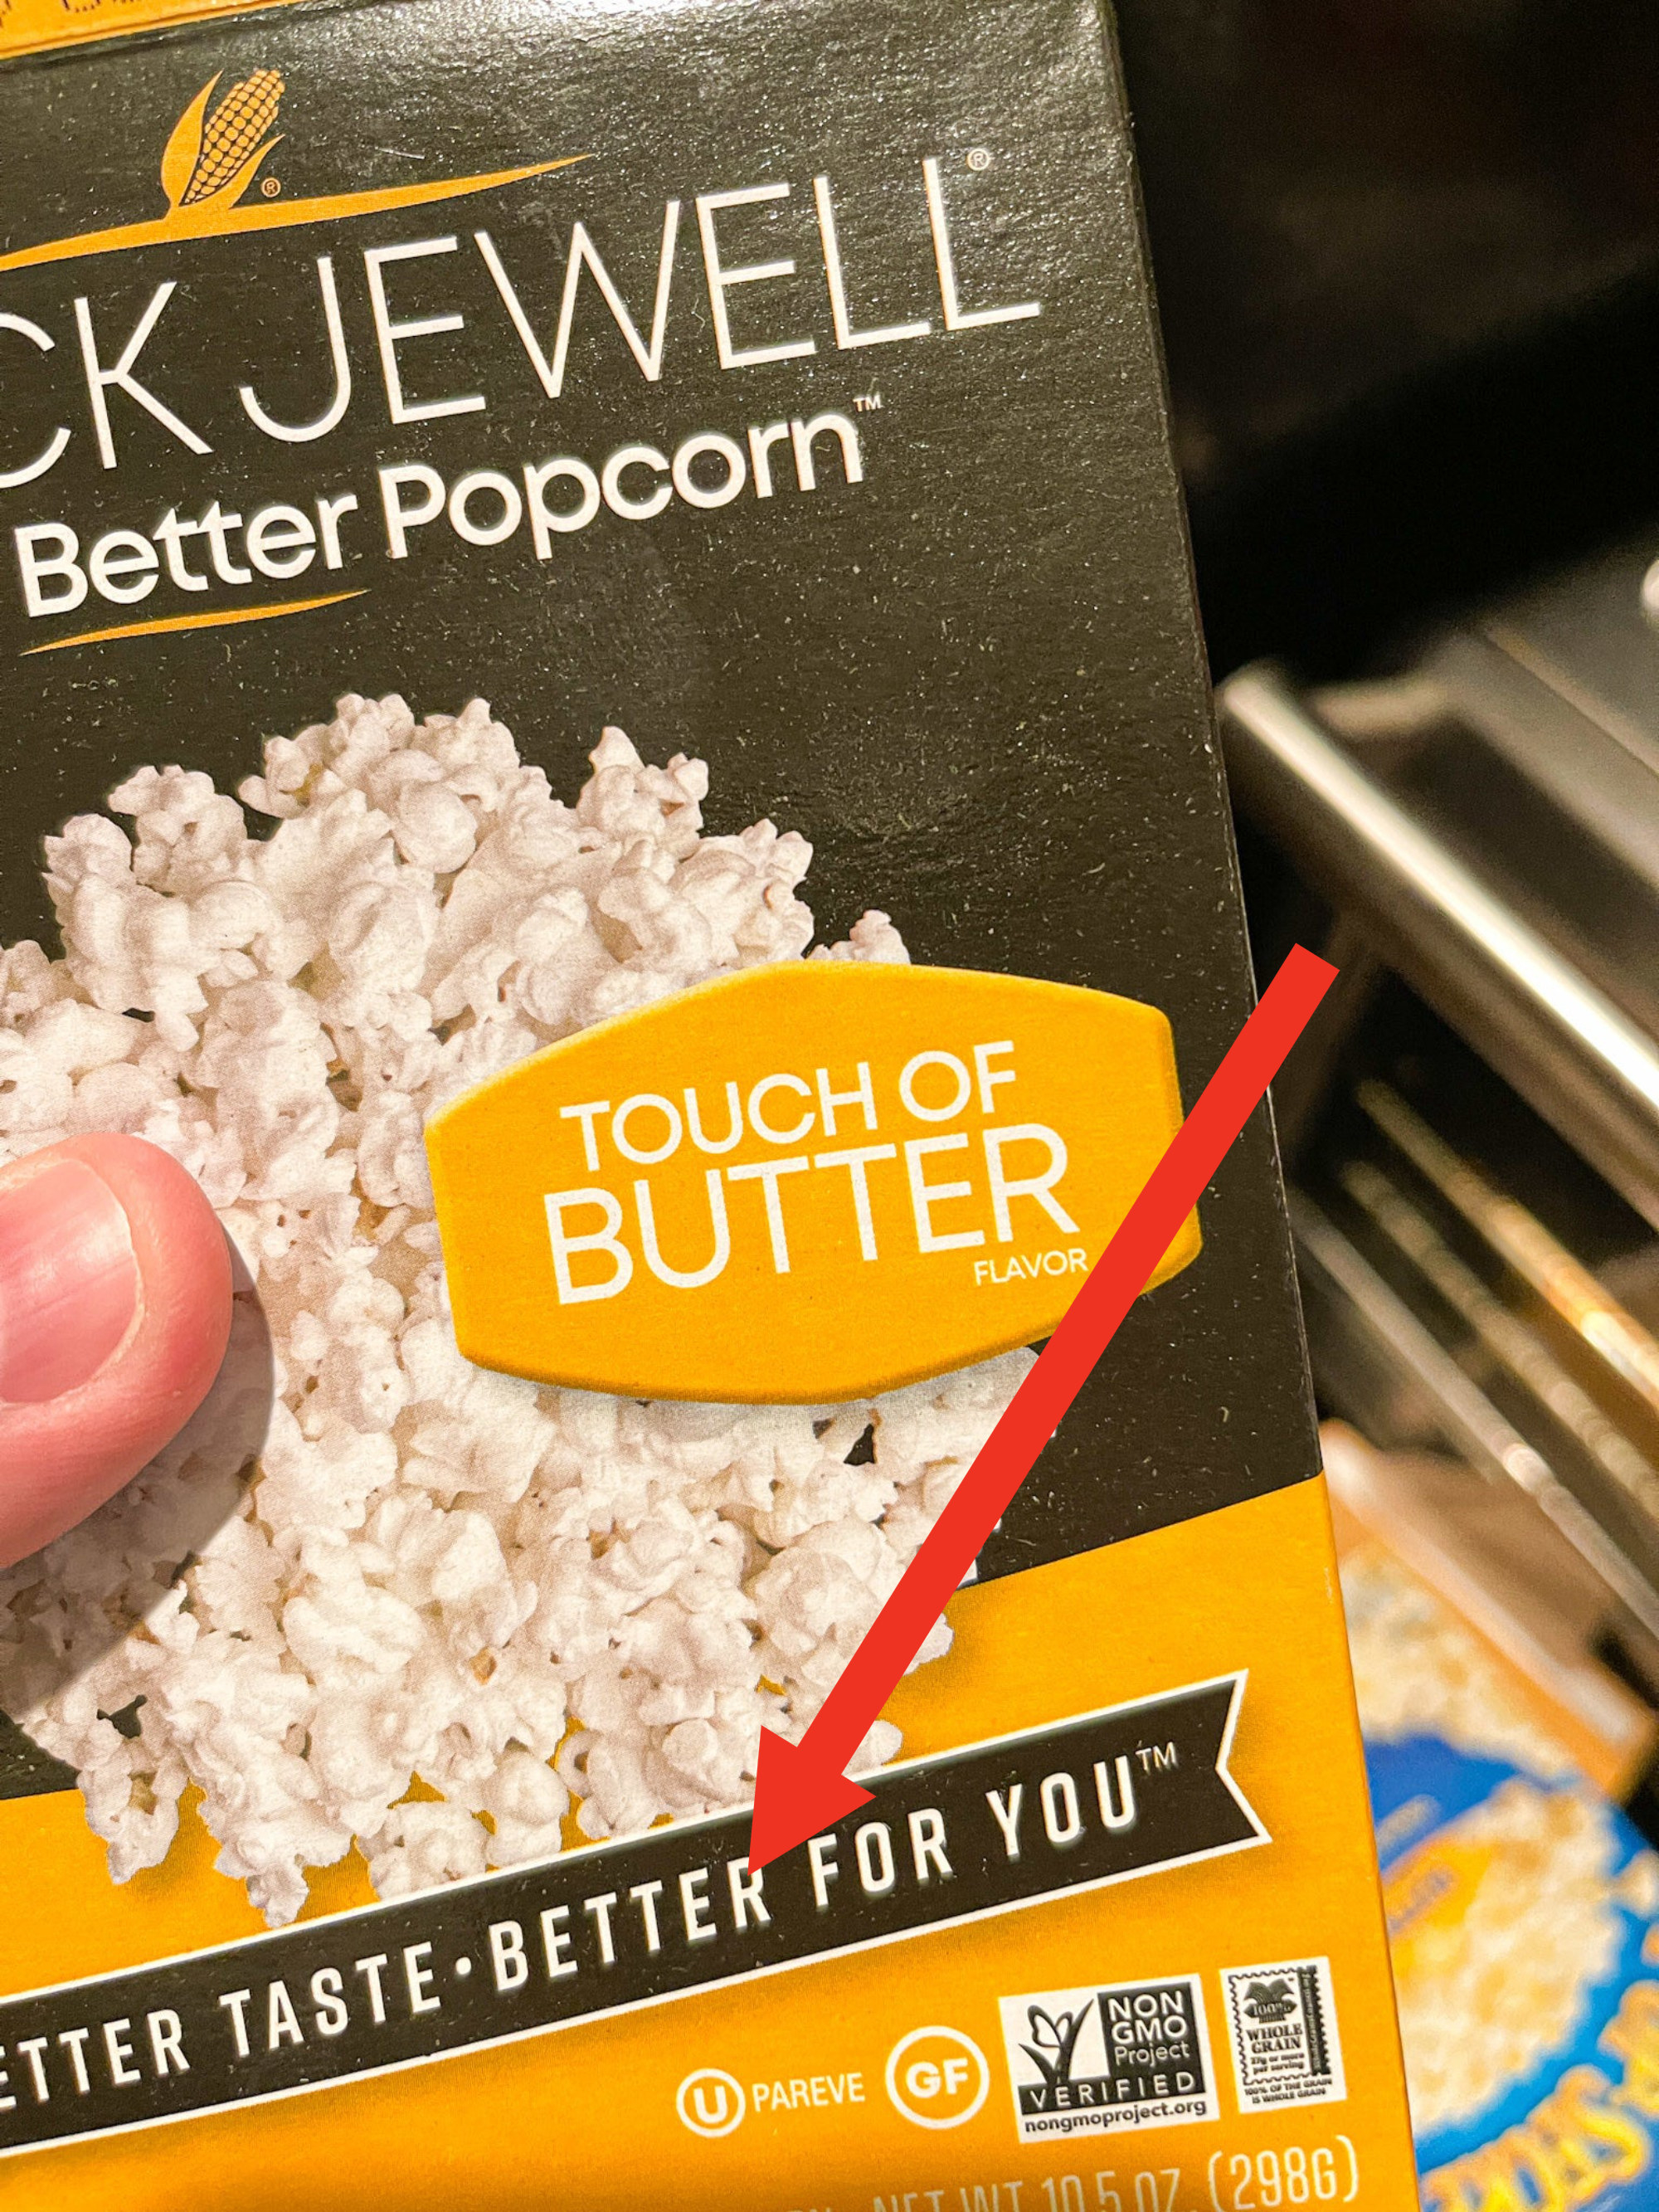 Black Jewell packaging with an arrow pointing to the words &quot;better for you&quot;